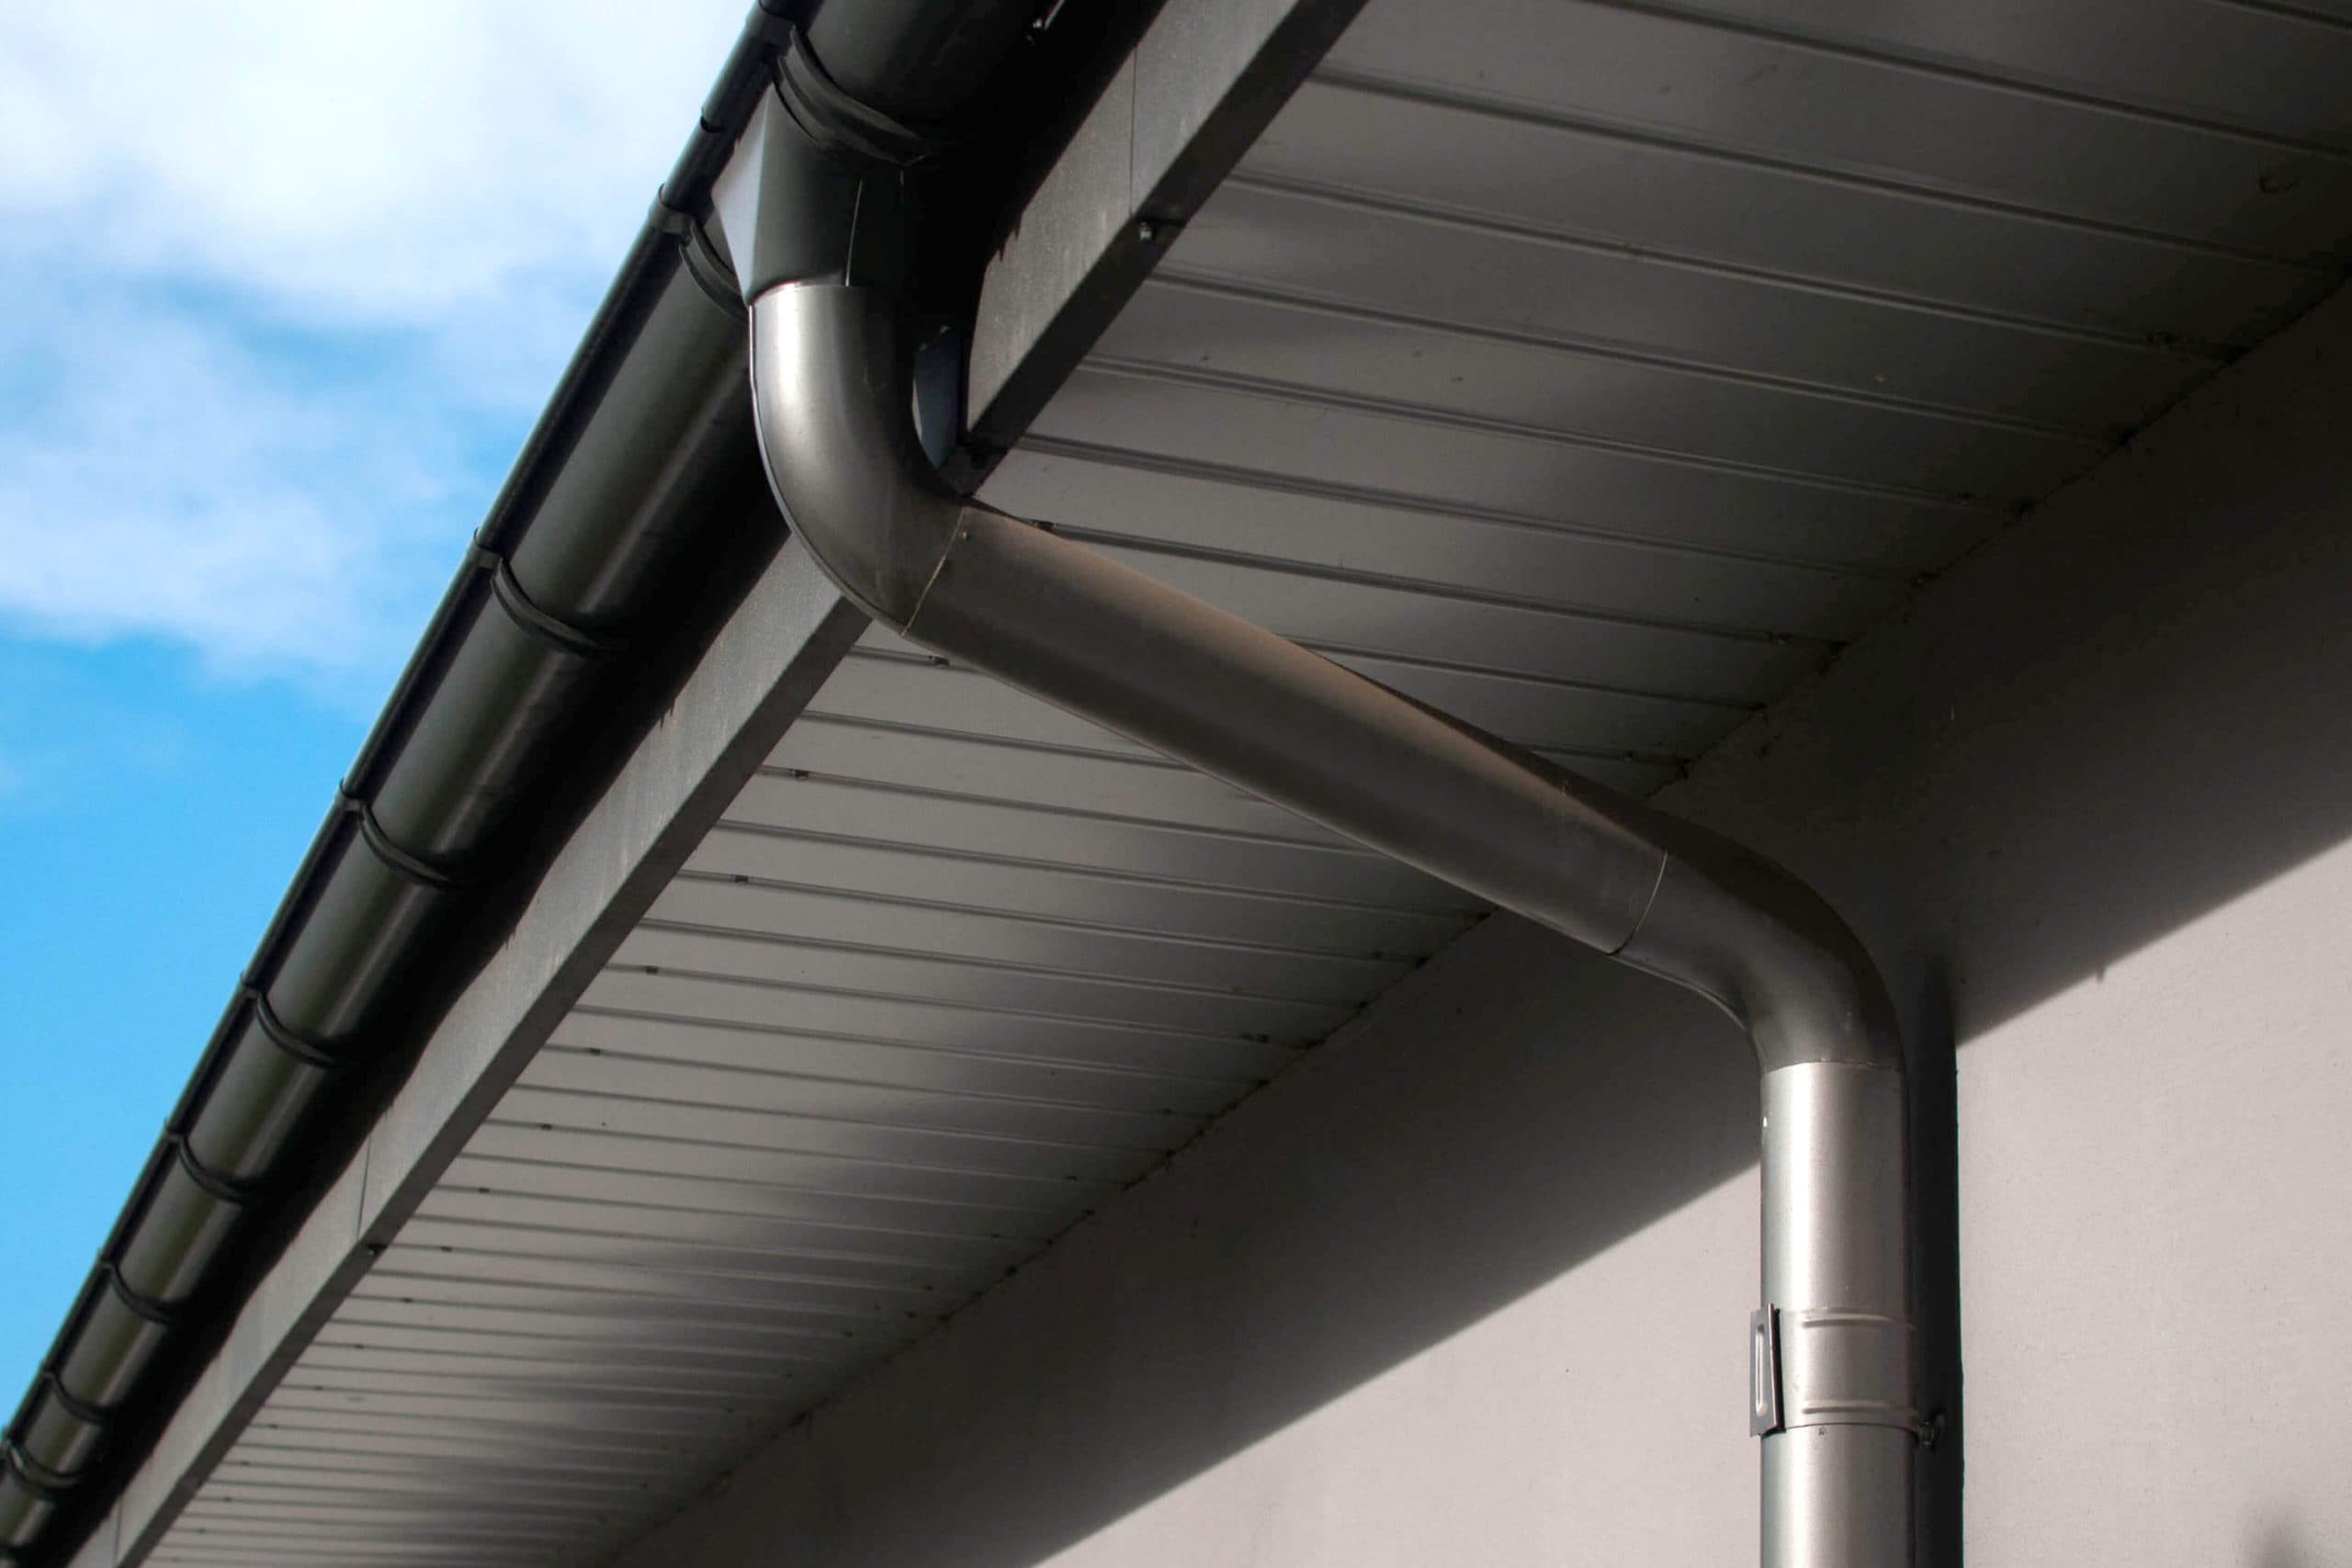 Reliable and affordable Galvanized gutters installation in Lakeland